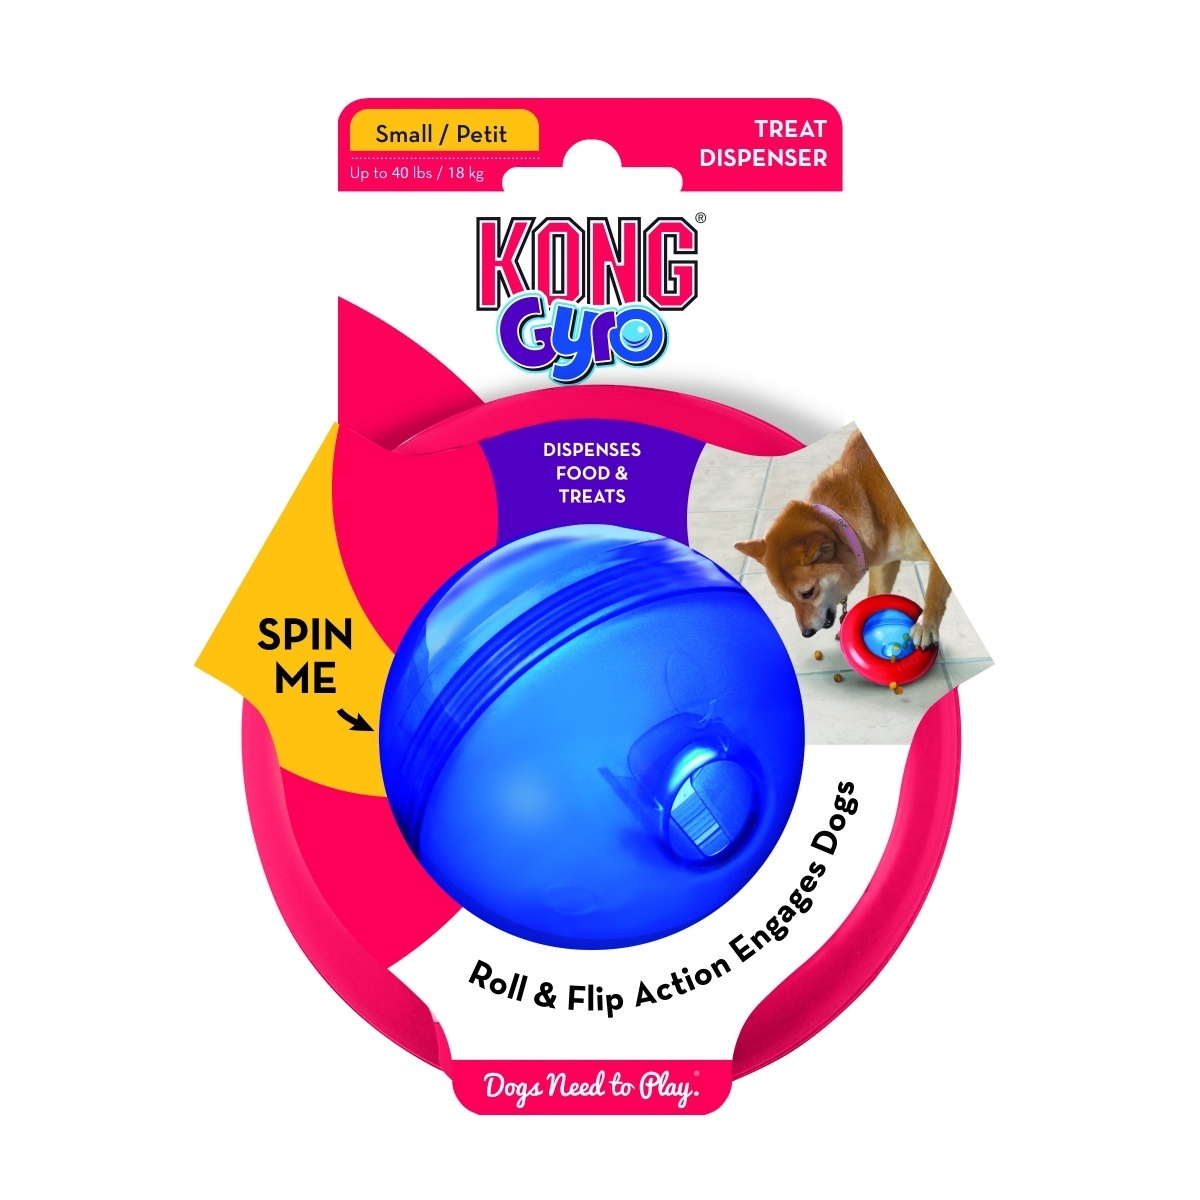 KONG Gyro Treat Dispensing Wobbler Dog Toy - Small - Pack of 4 image 1